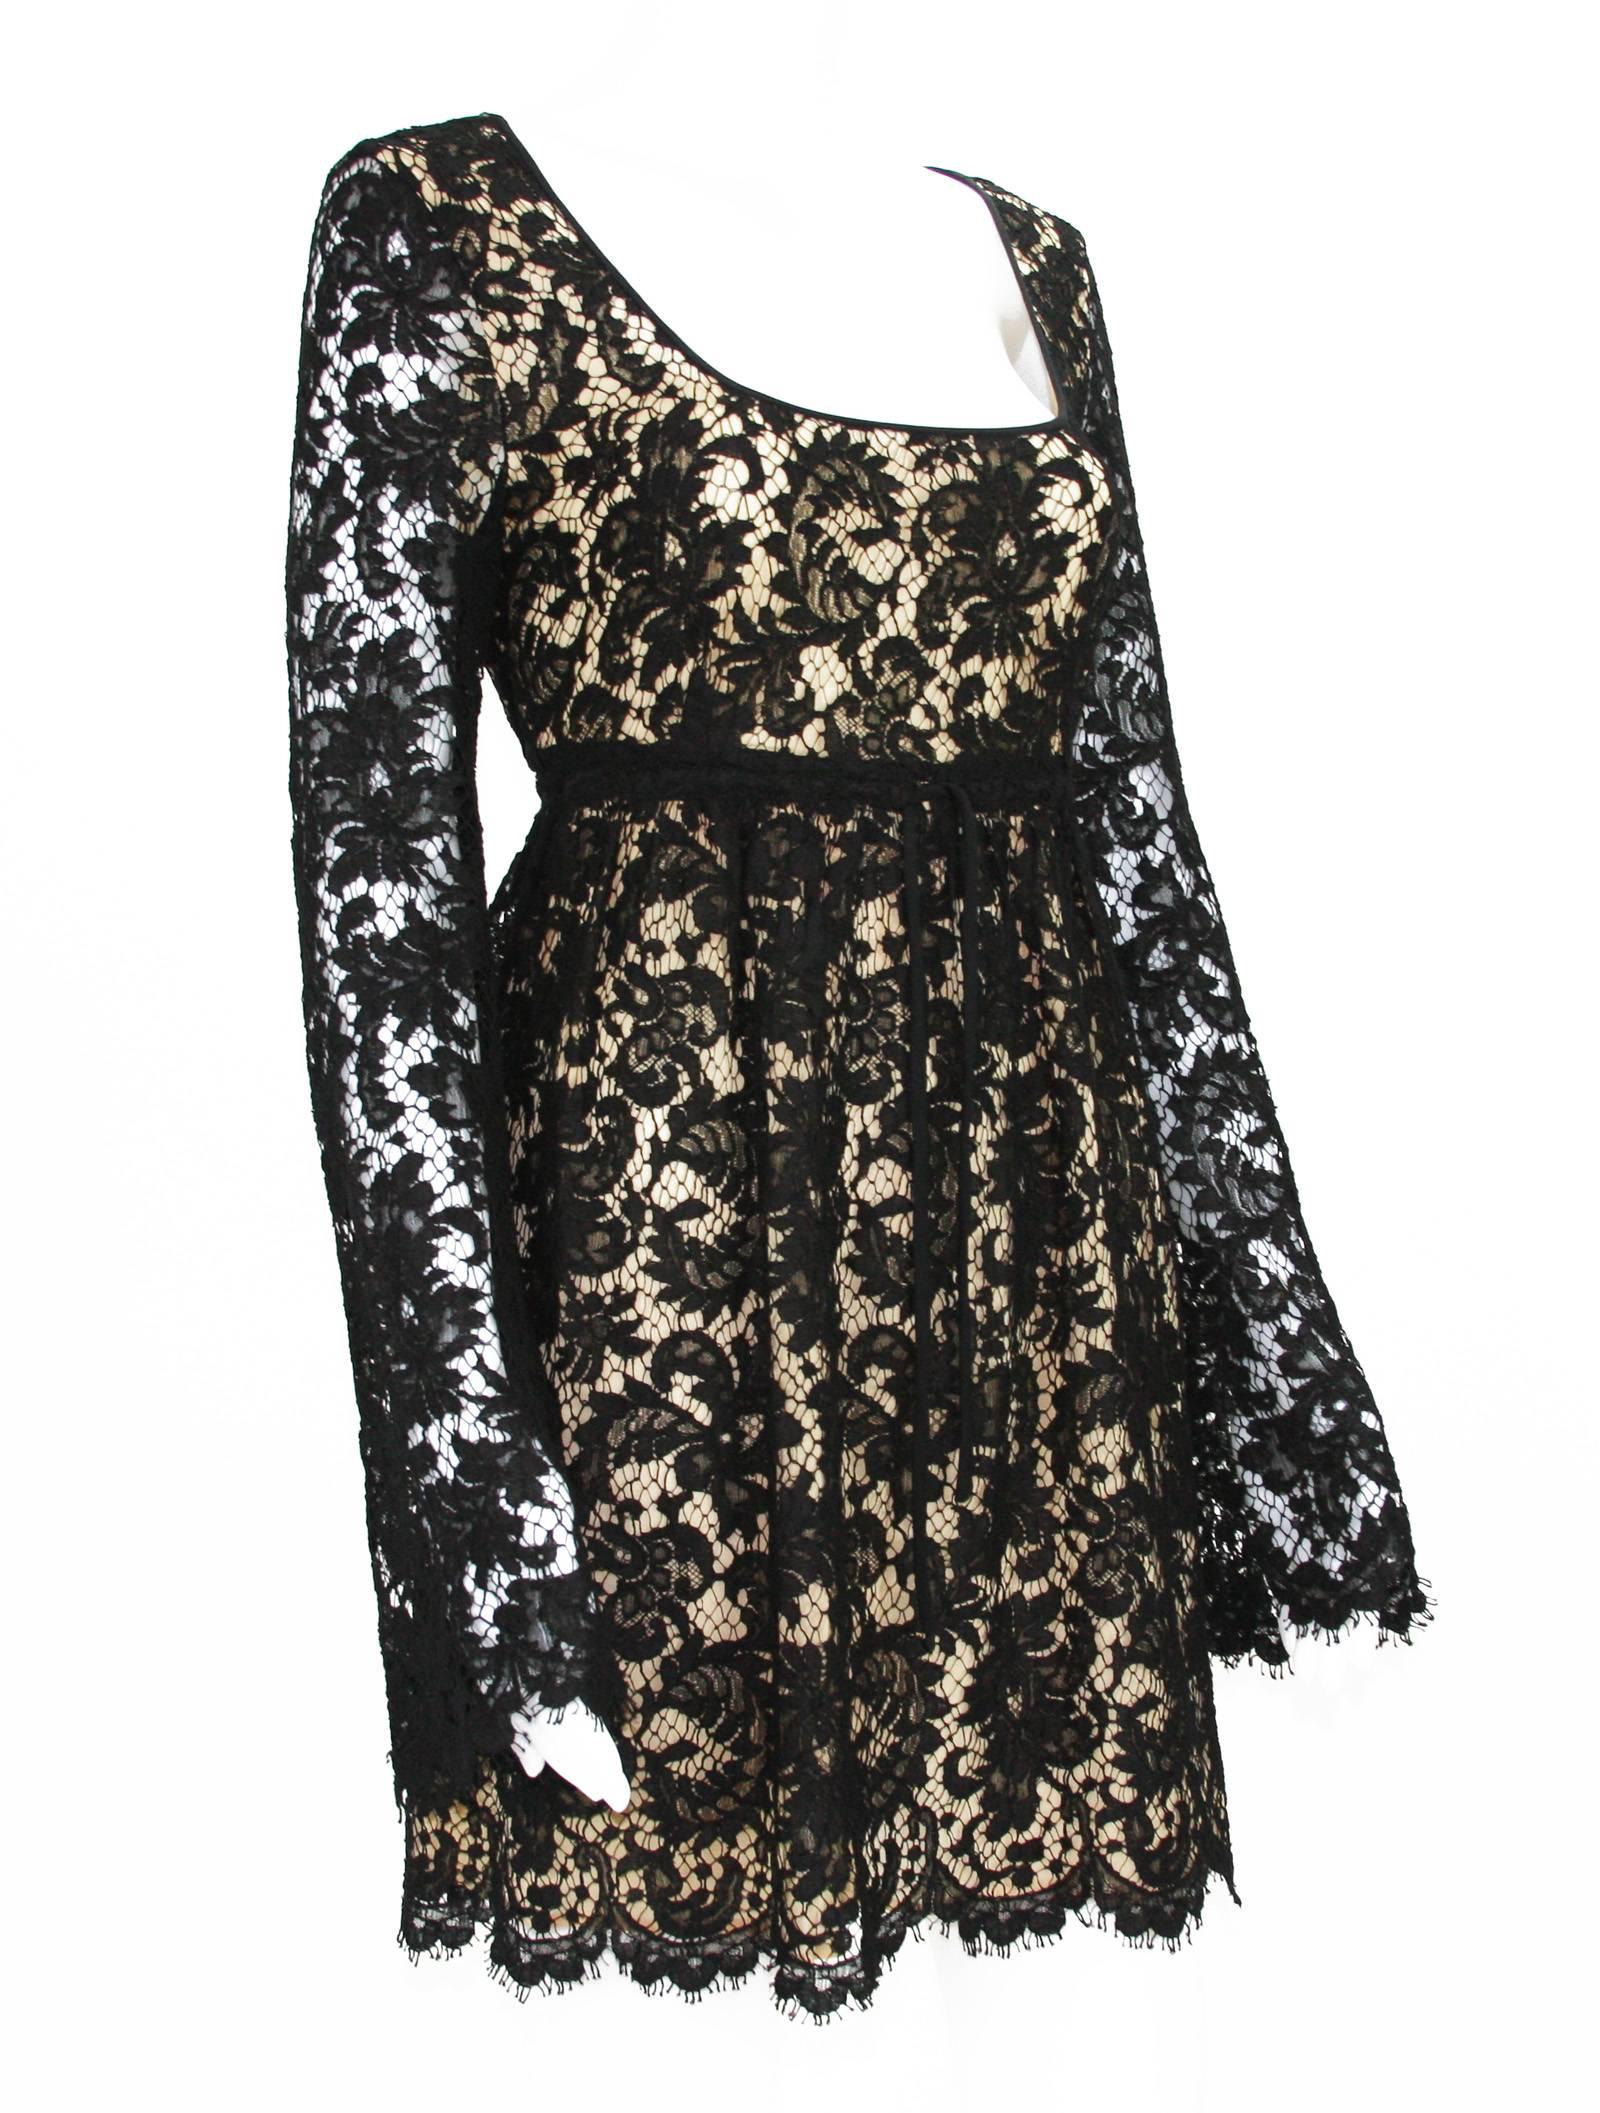 Black Vintage Tom Ford for Gucci S/S 1996 Baby Doll Lace Mini Dress  For Sale